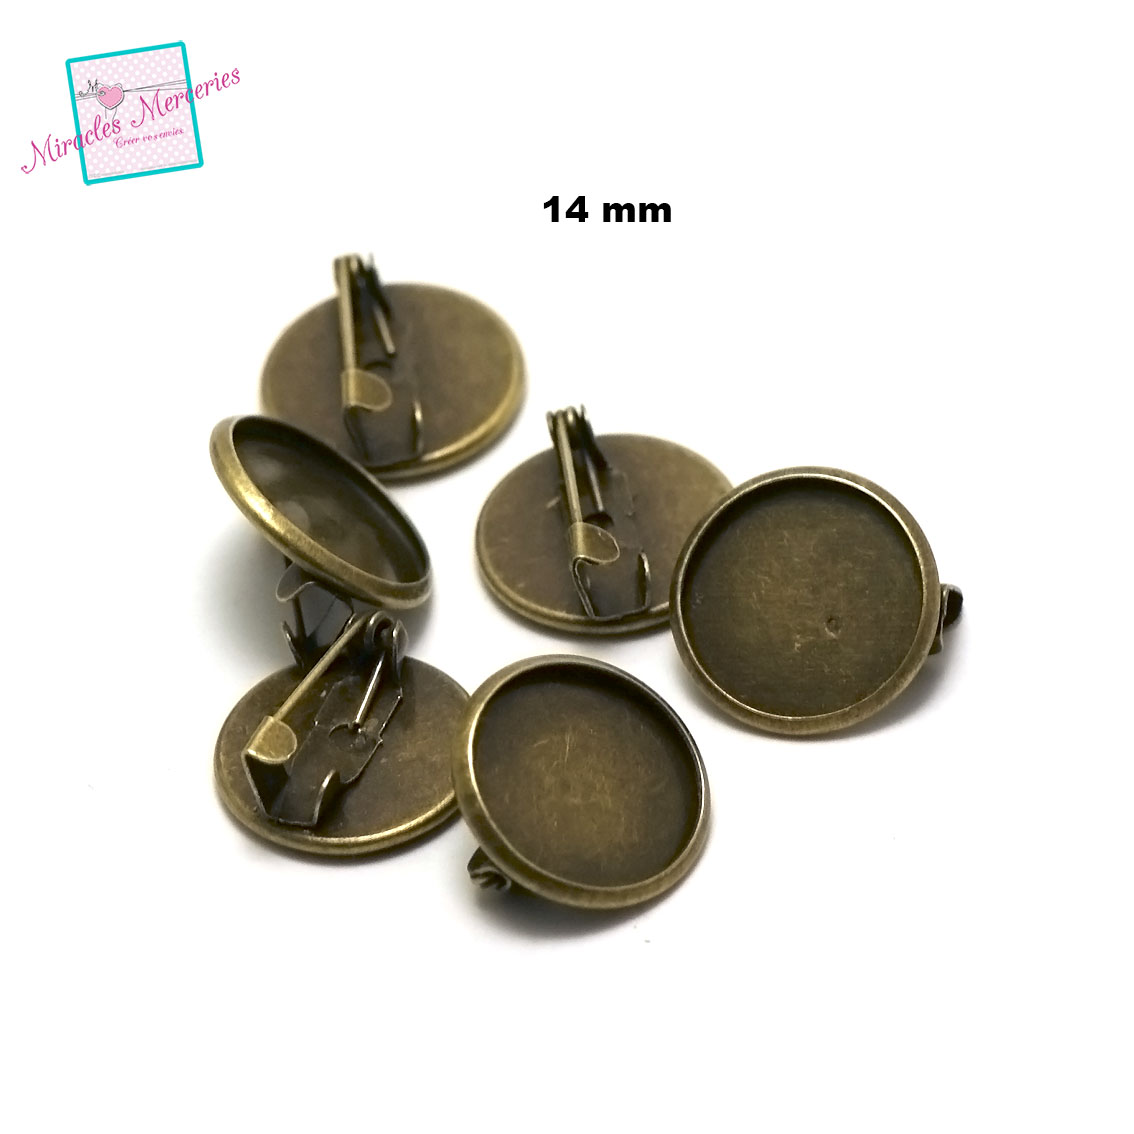 10 broches support cabochon ronde 14 mm,bronze